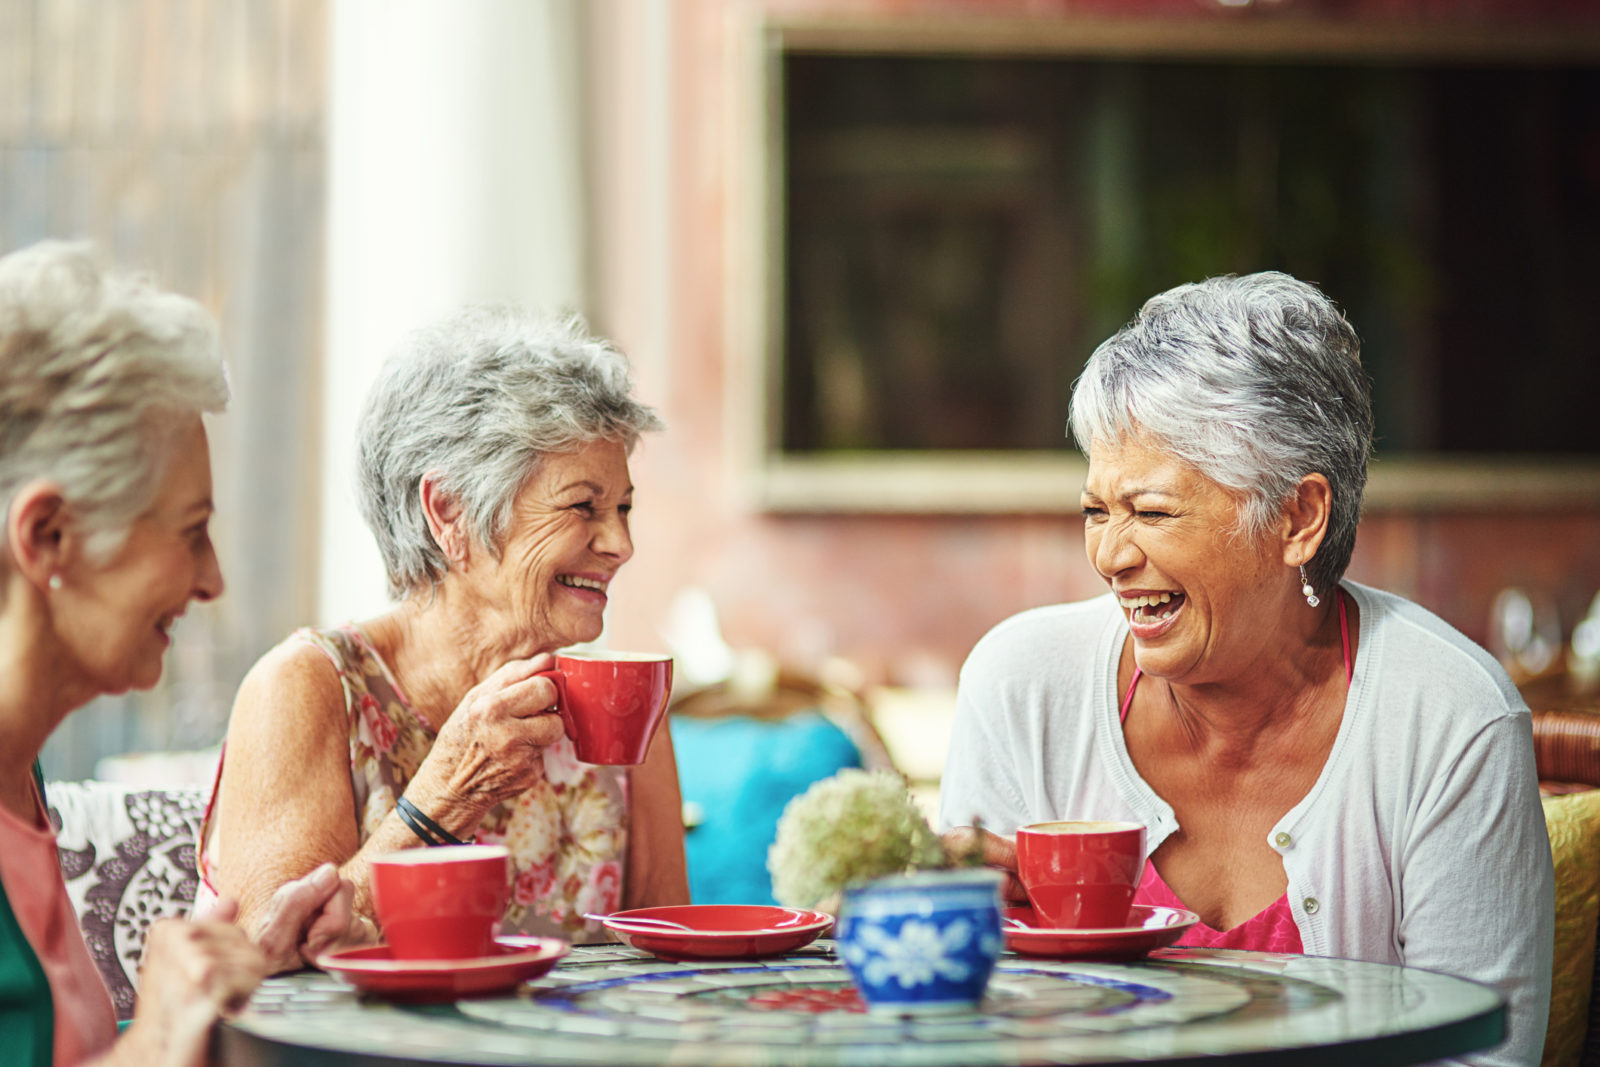 A group of elderly friends having coffee together